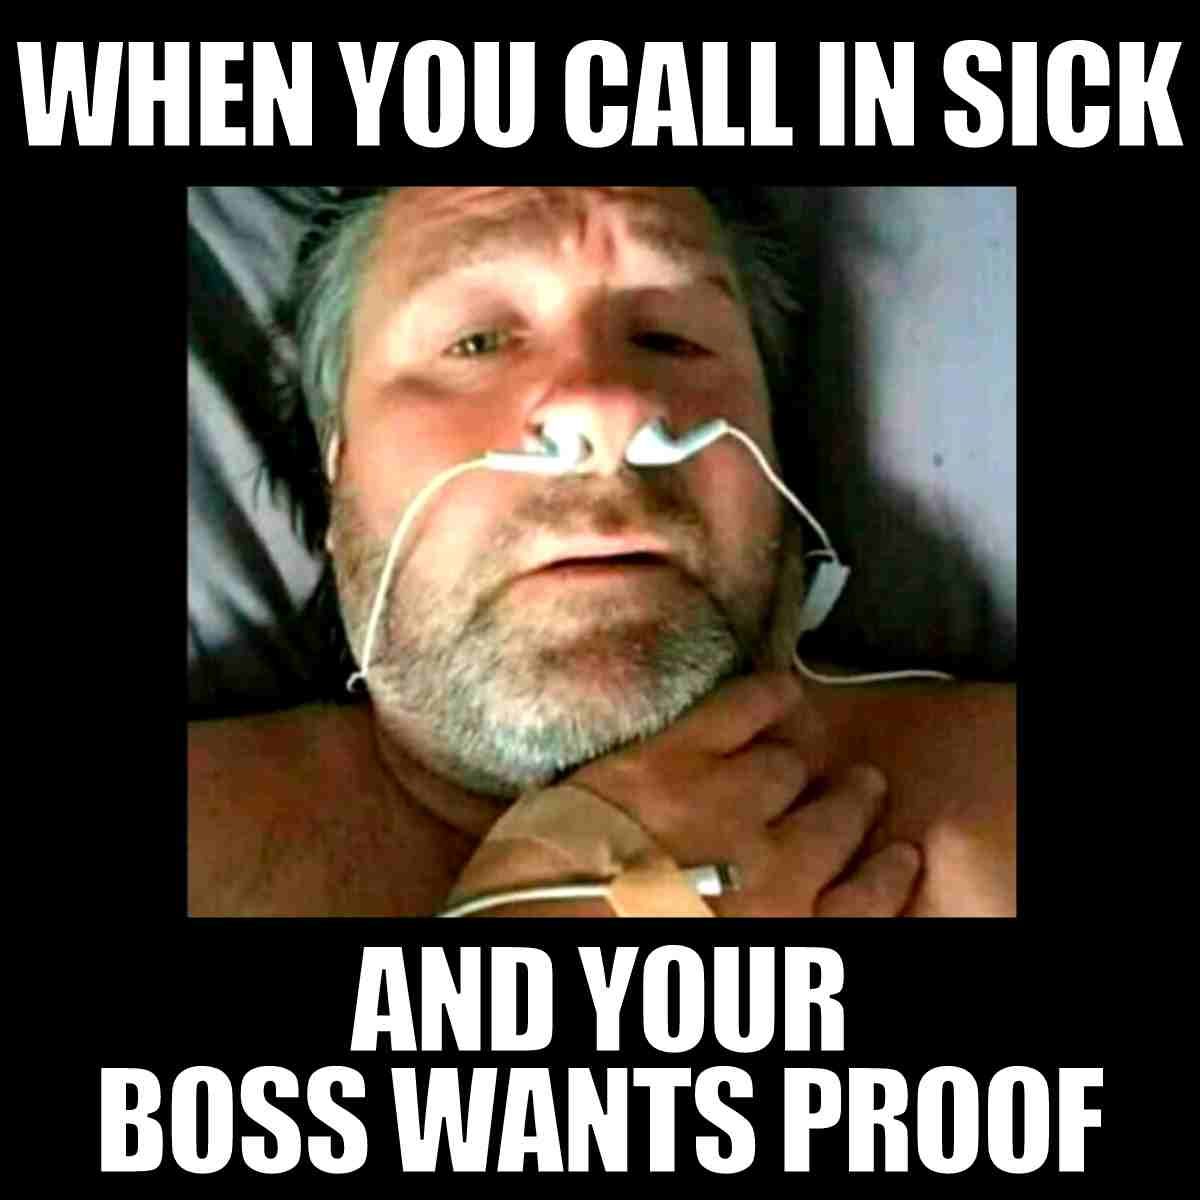 WHEN YOU CALL IN SICK
AND YOUR
BOSS WANTS PROOF